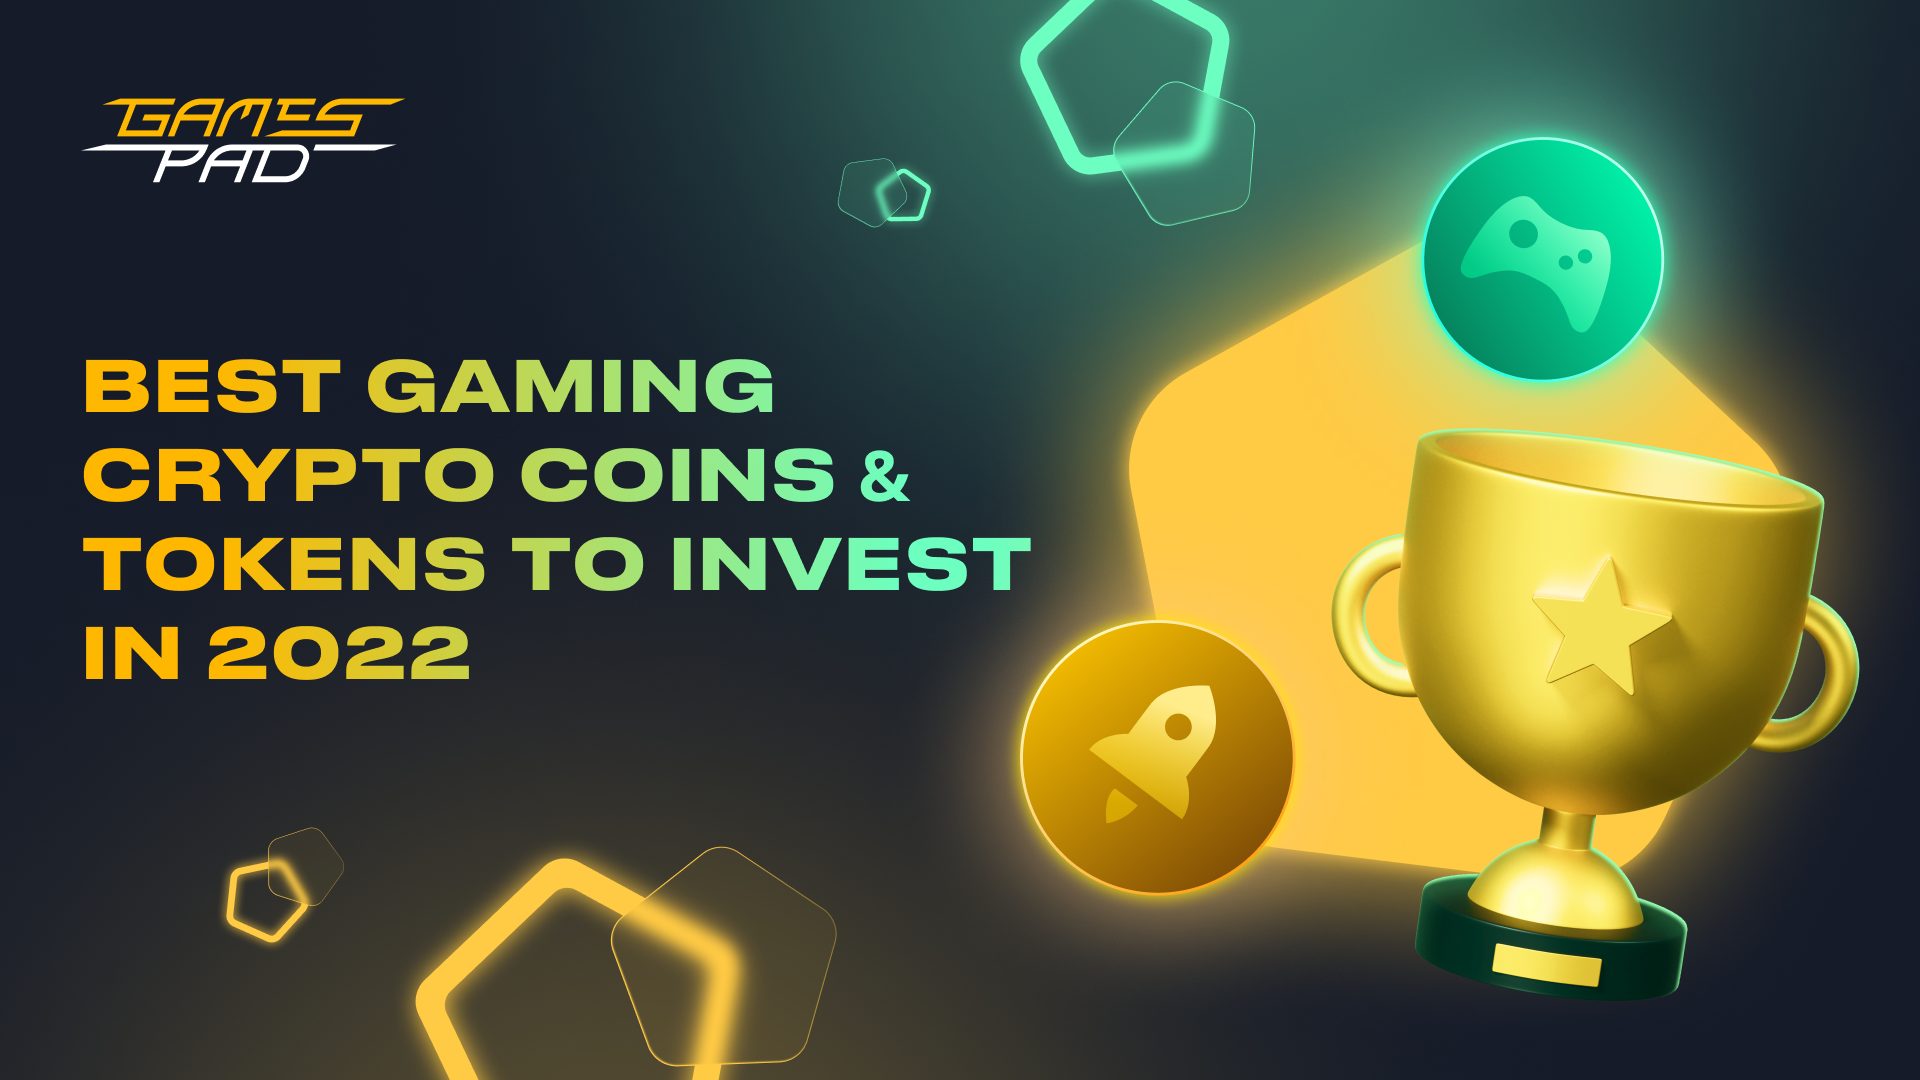 Best Gaming Crypto Coins & Tokens To Invest In 2022